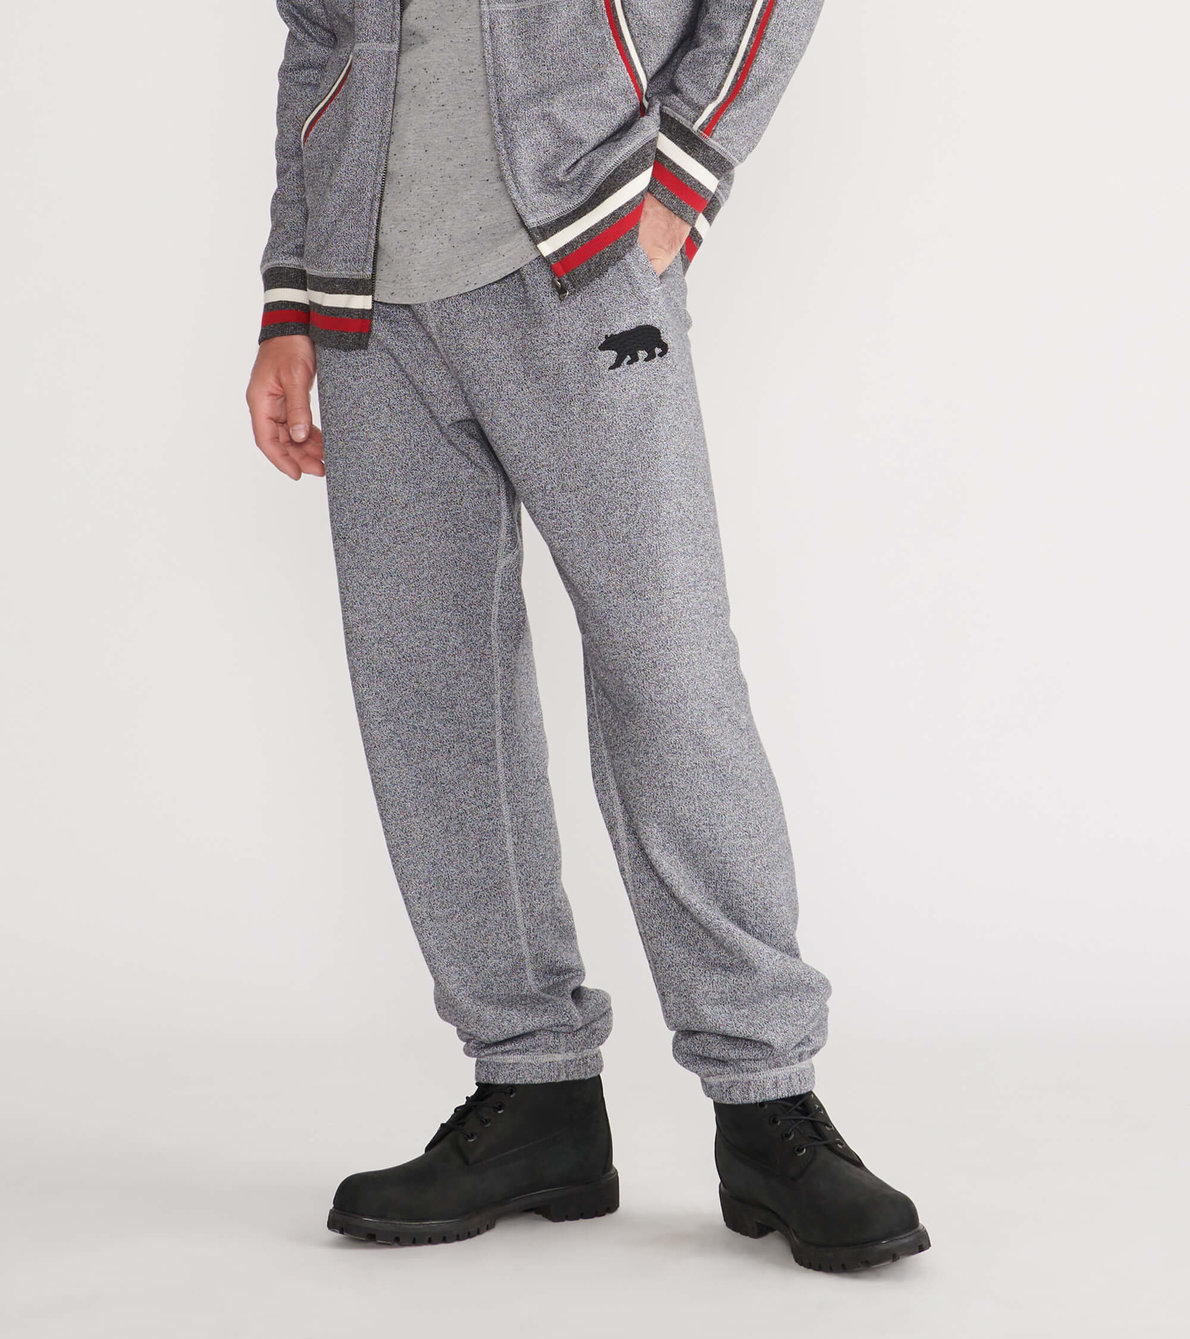 View larger image of Marled Grey Bear Men's Heritage Joggers